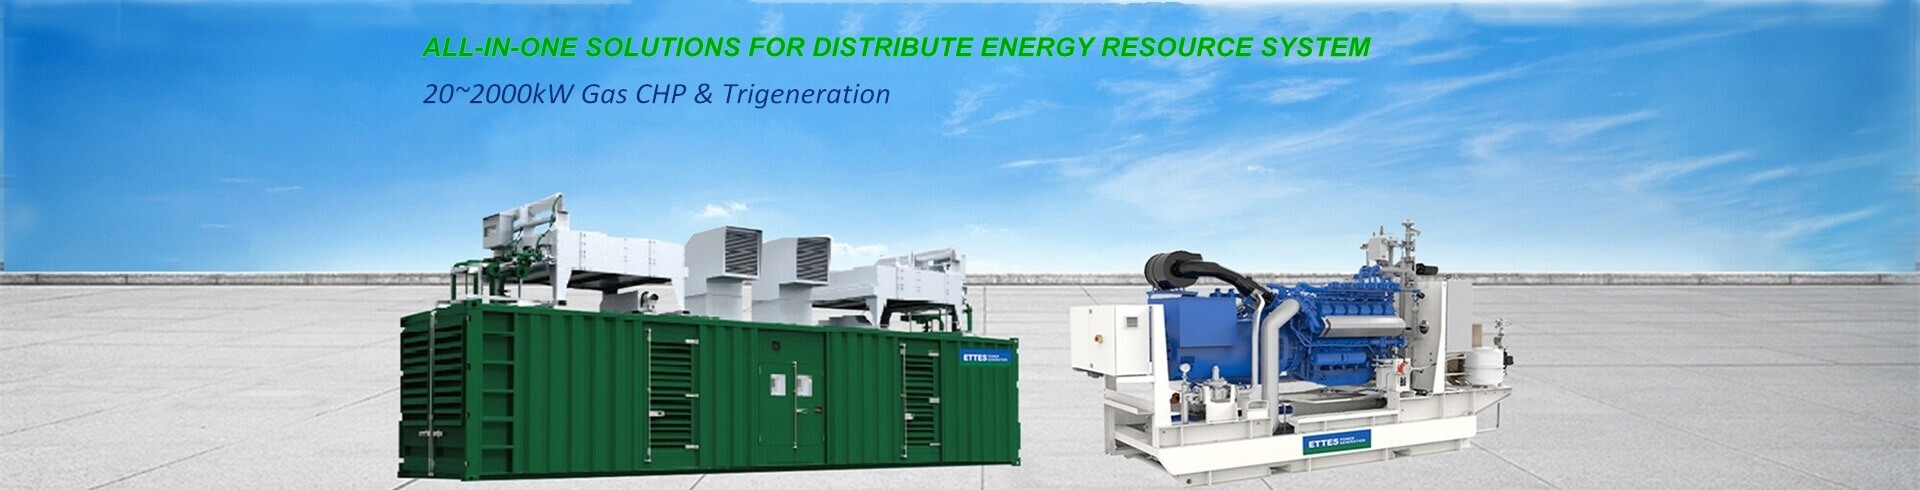 ETTES POWER Container 500kW 1000kW 1MW natural gas biogas generation & CHP CCHP